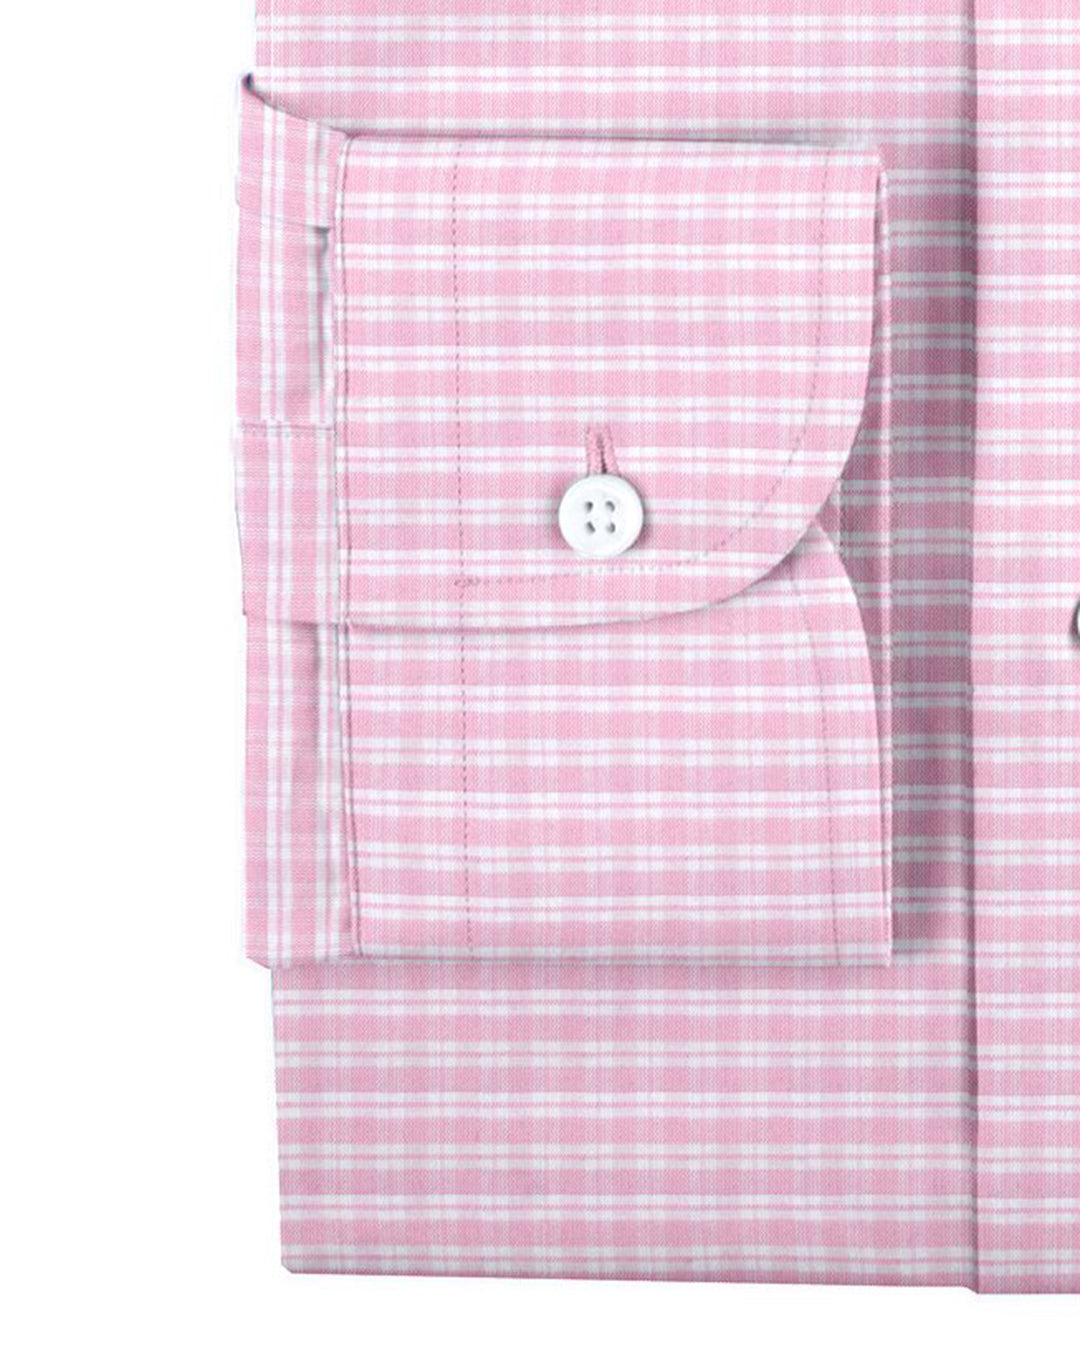 Cuff of the custom linen shirt for men in white with light pink checks by Luxire Clothing